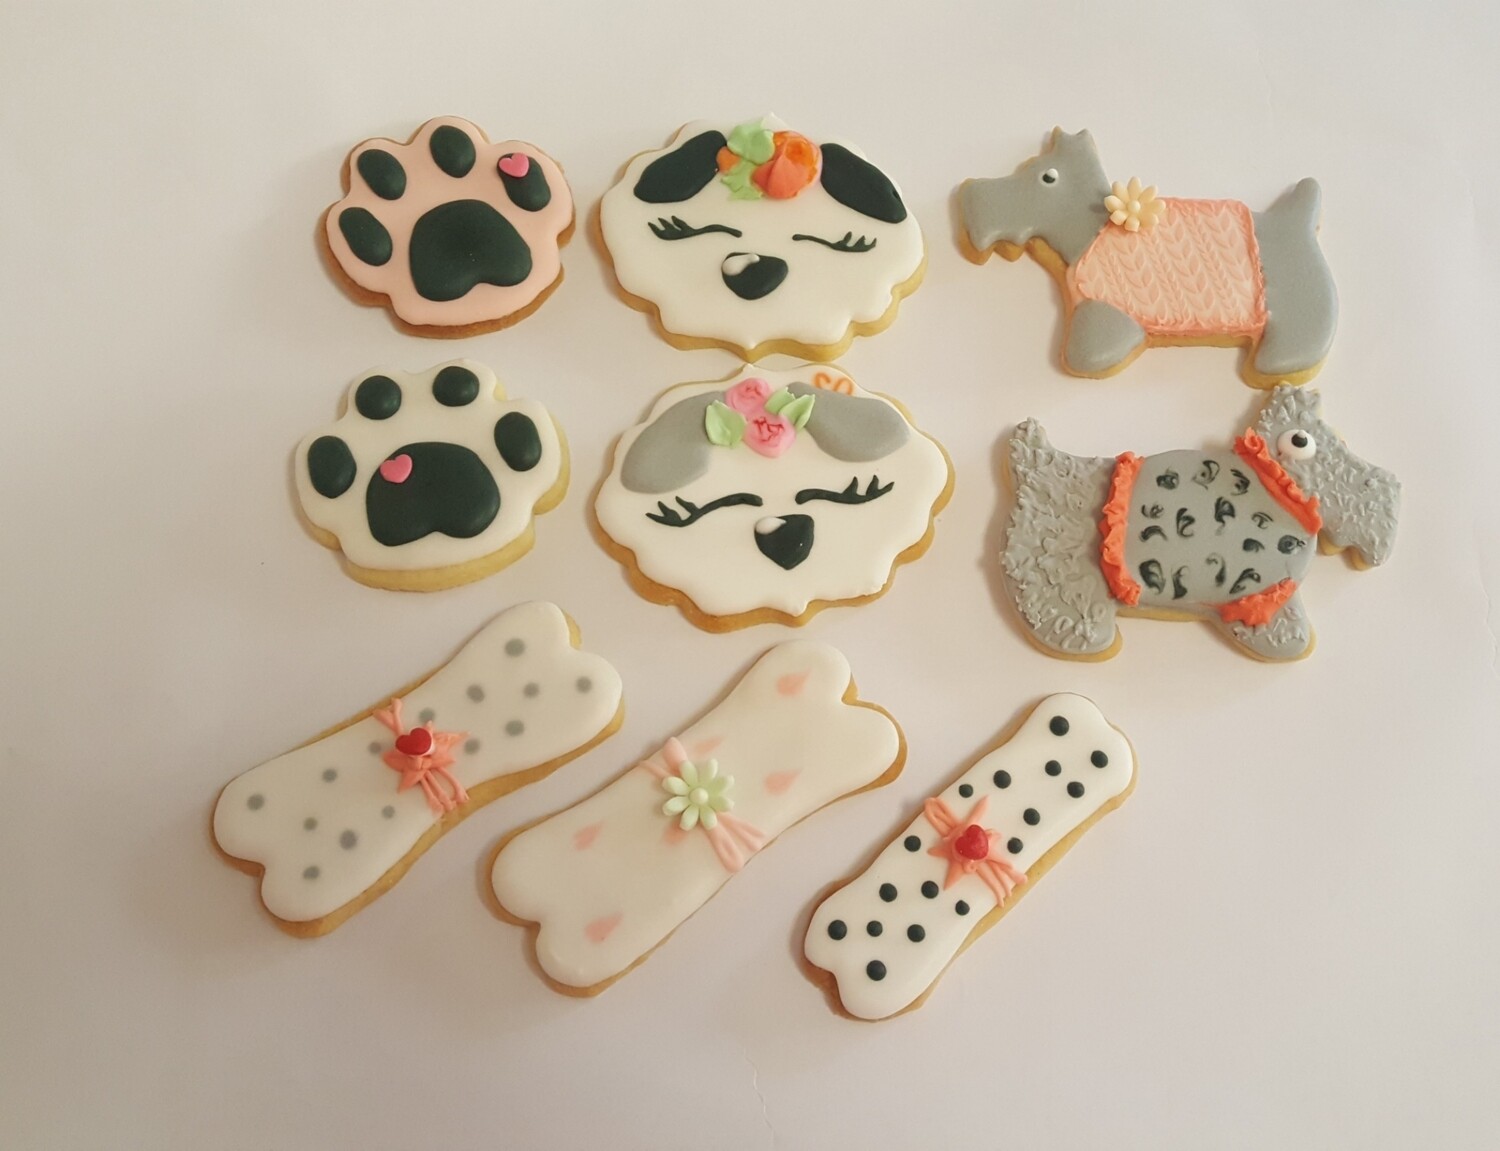 Iced biscuits themed